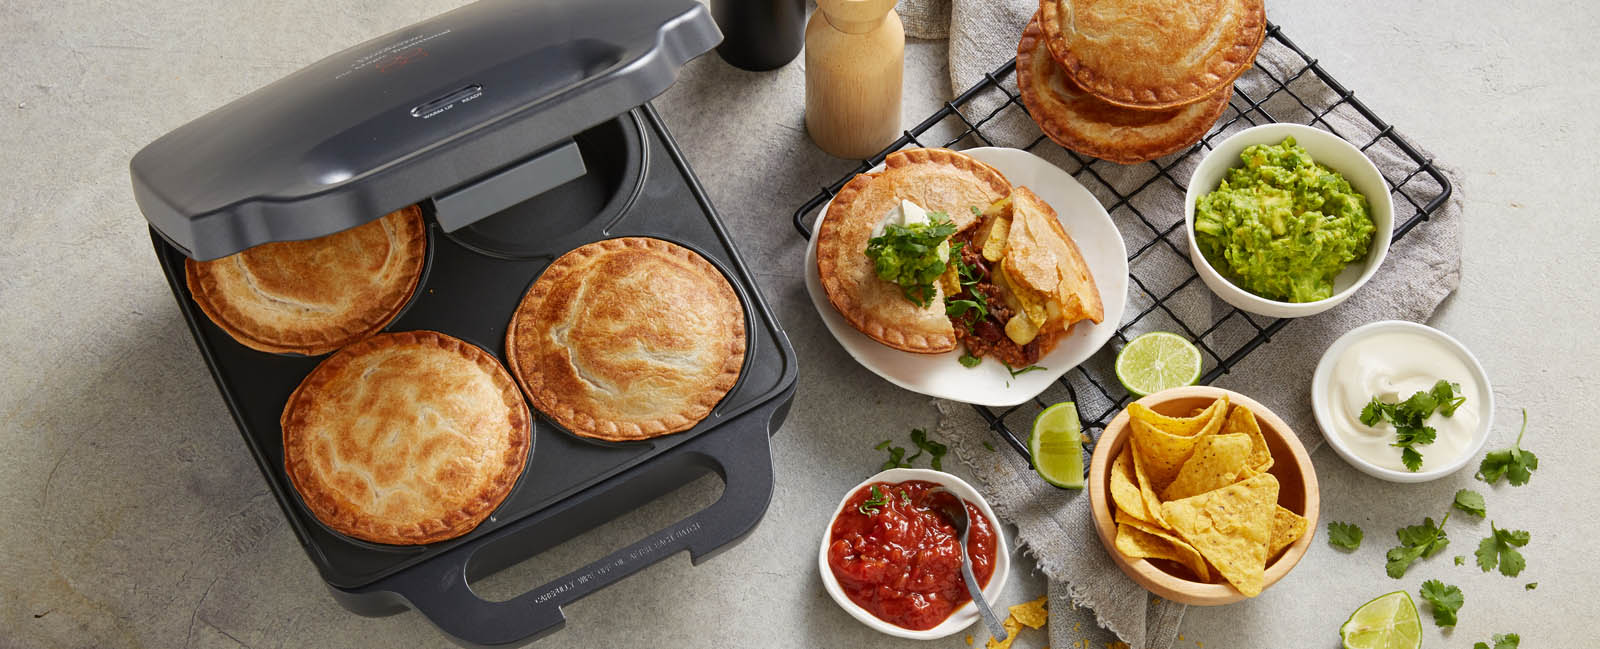 Breville Mini Pie Maker: Product Review - Finding Our Way Now